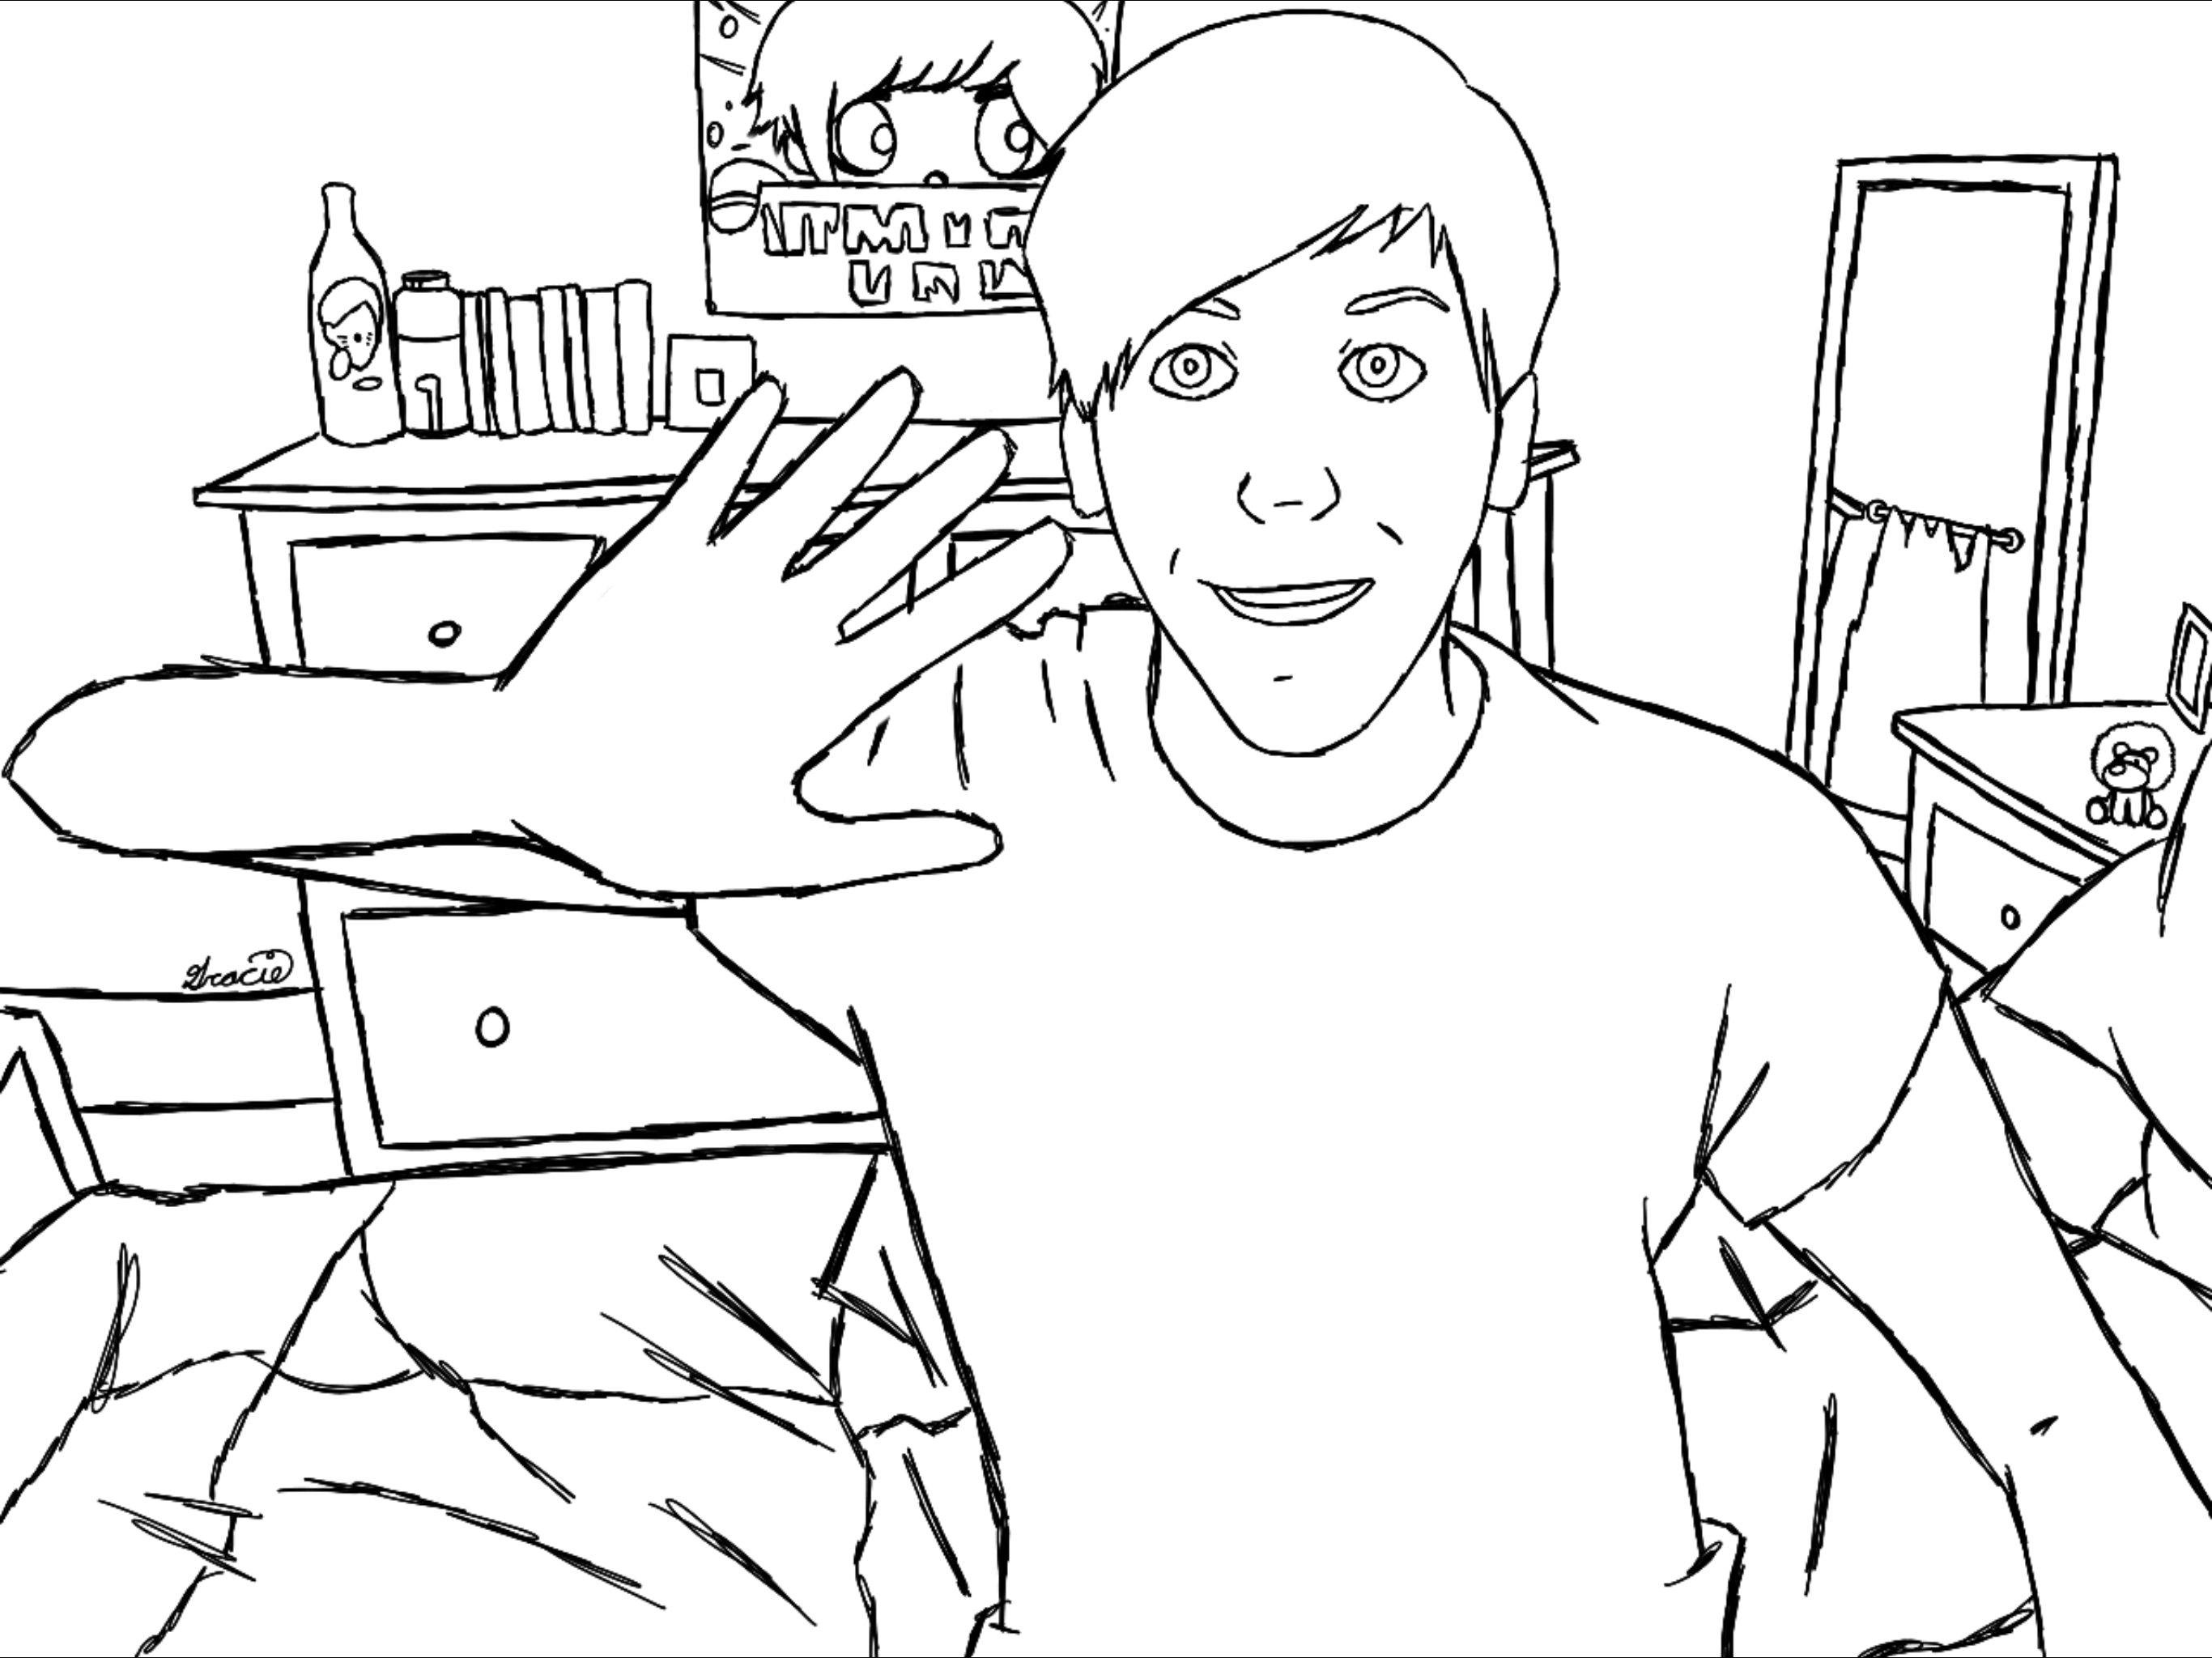 My First Intentional Amazingphil Fanart I Traced A Photo For This